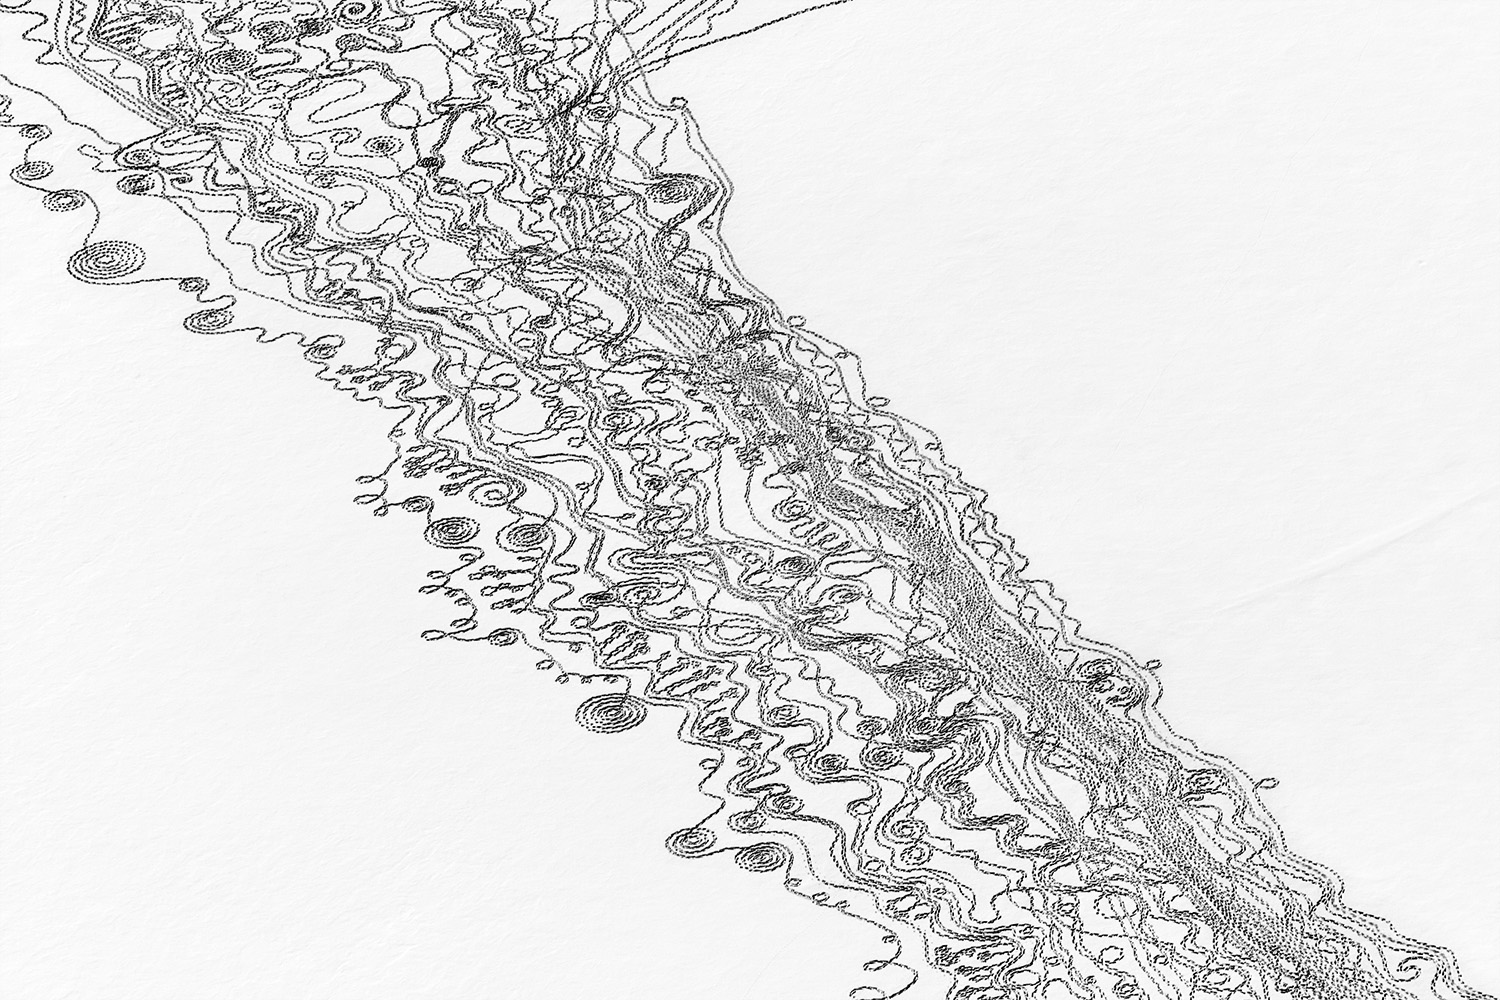 We Are the Water snow drawing